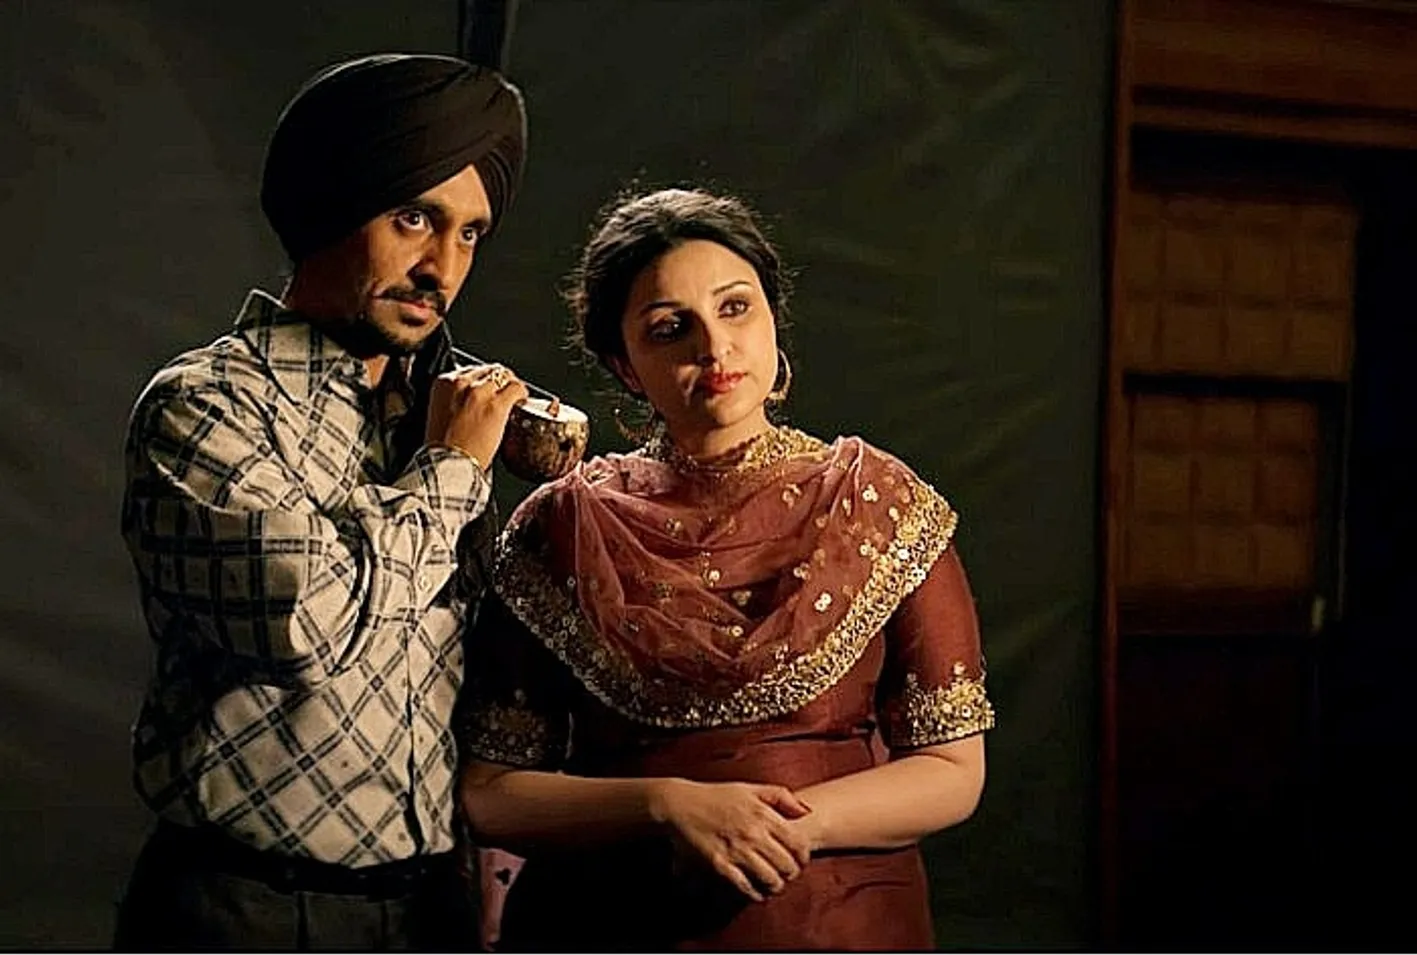 Amar Singh Chamkila Trailer: Diljit Dosanjh Makes The World Look More  Musical And Inspirational in This Netflix Biopic – Watch | India.com